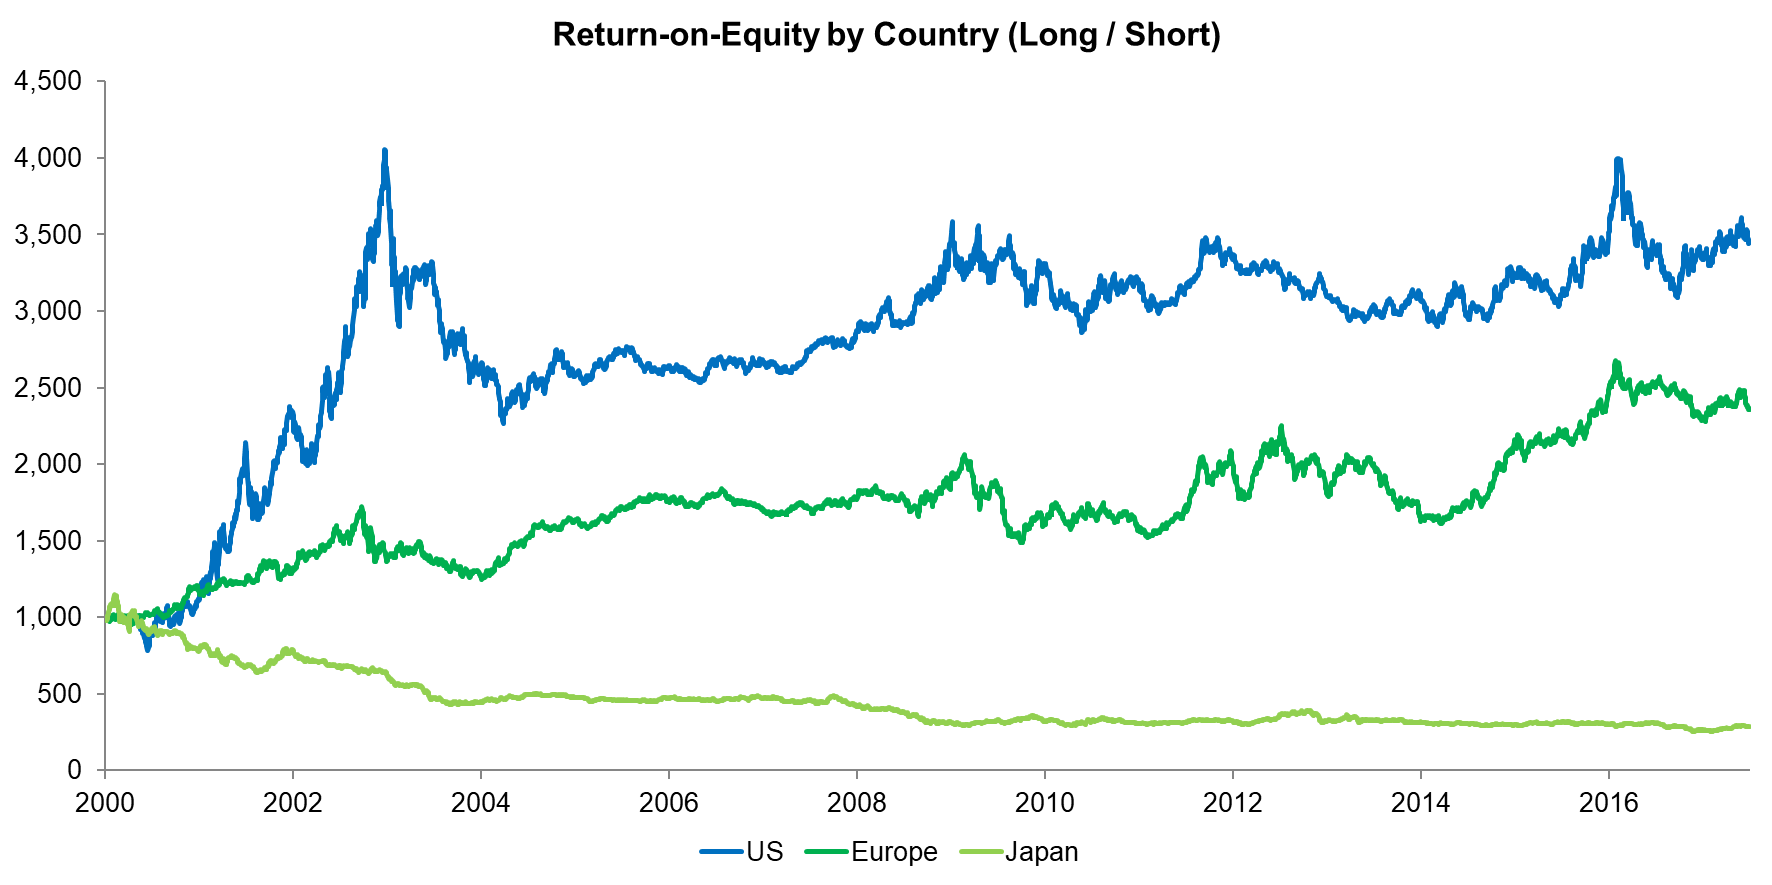 Return-on-Equity by Country (Long Short)